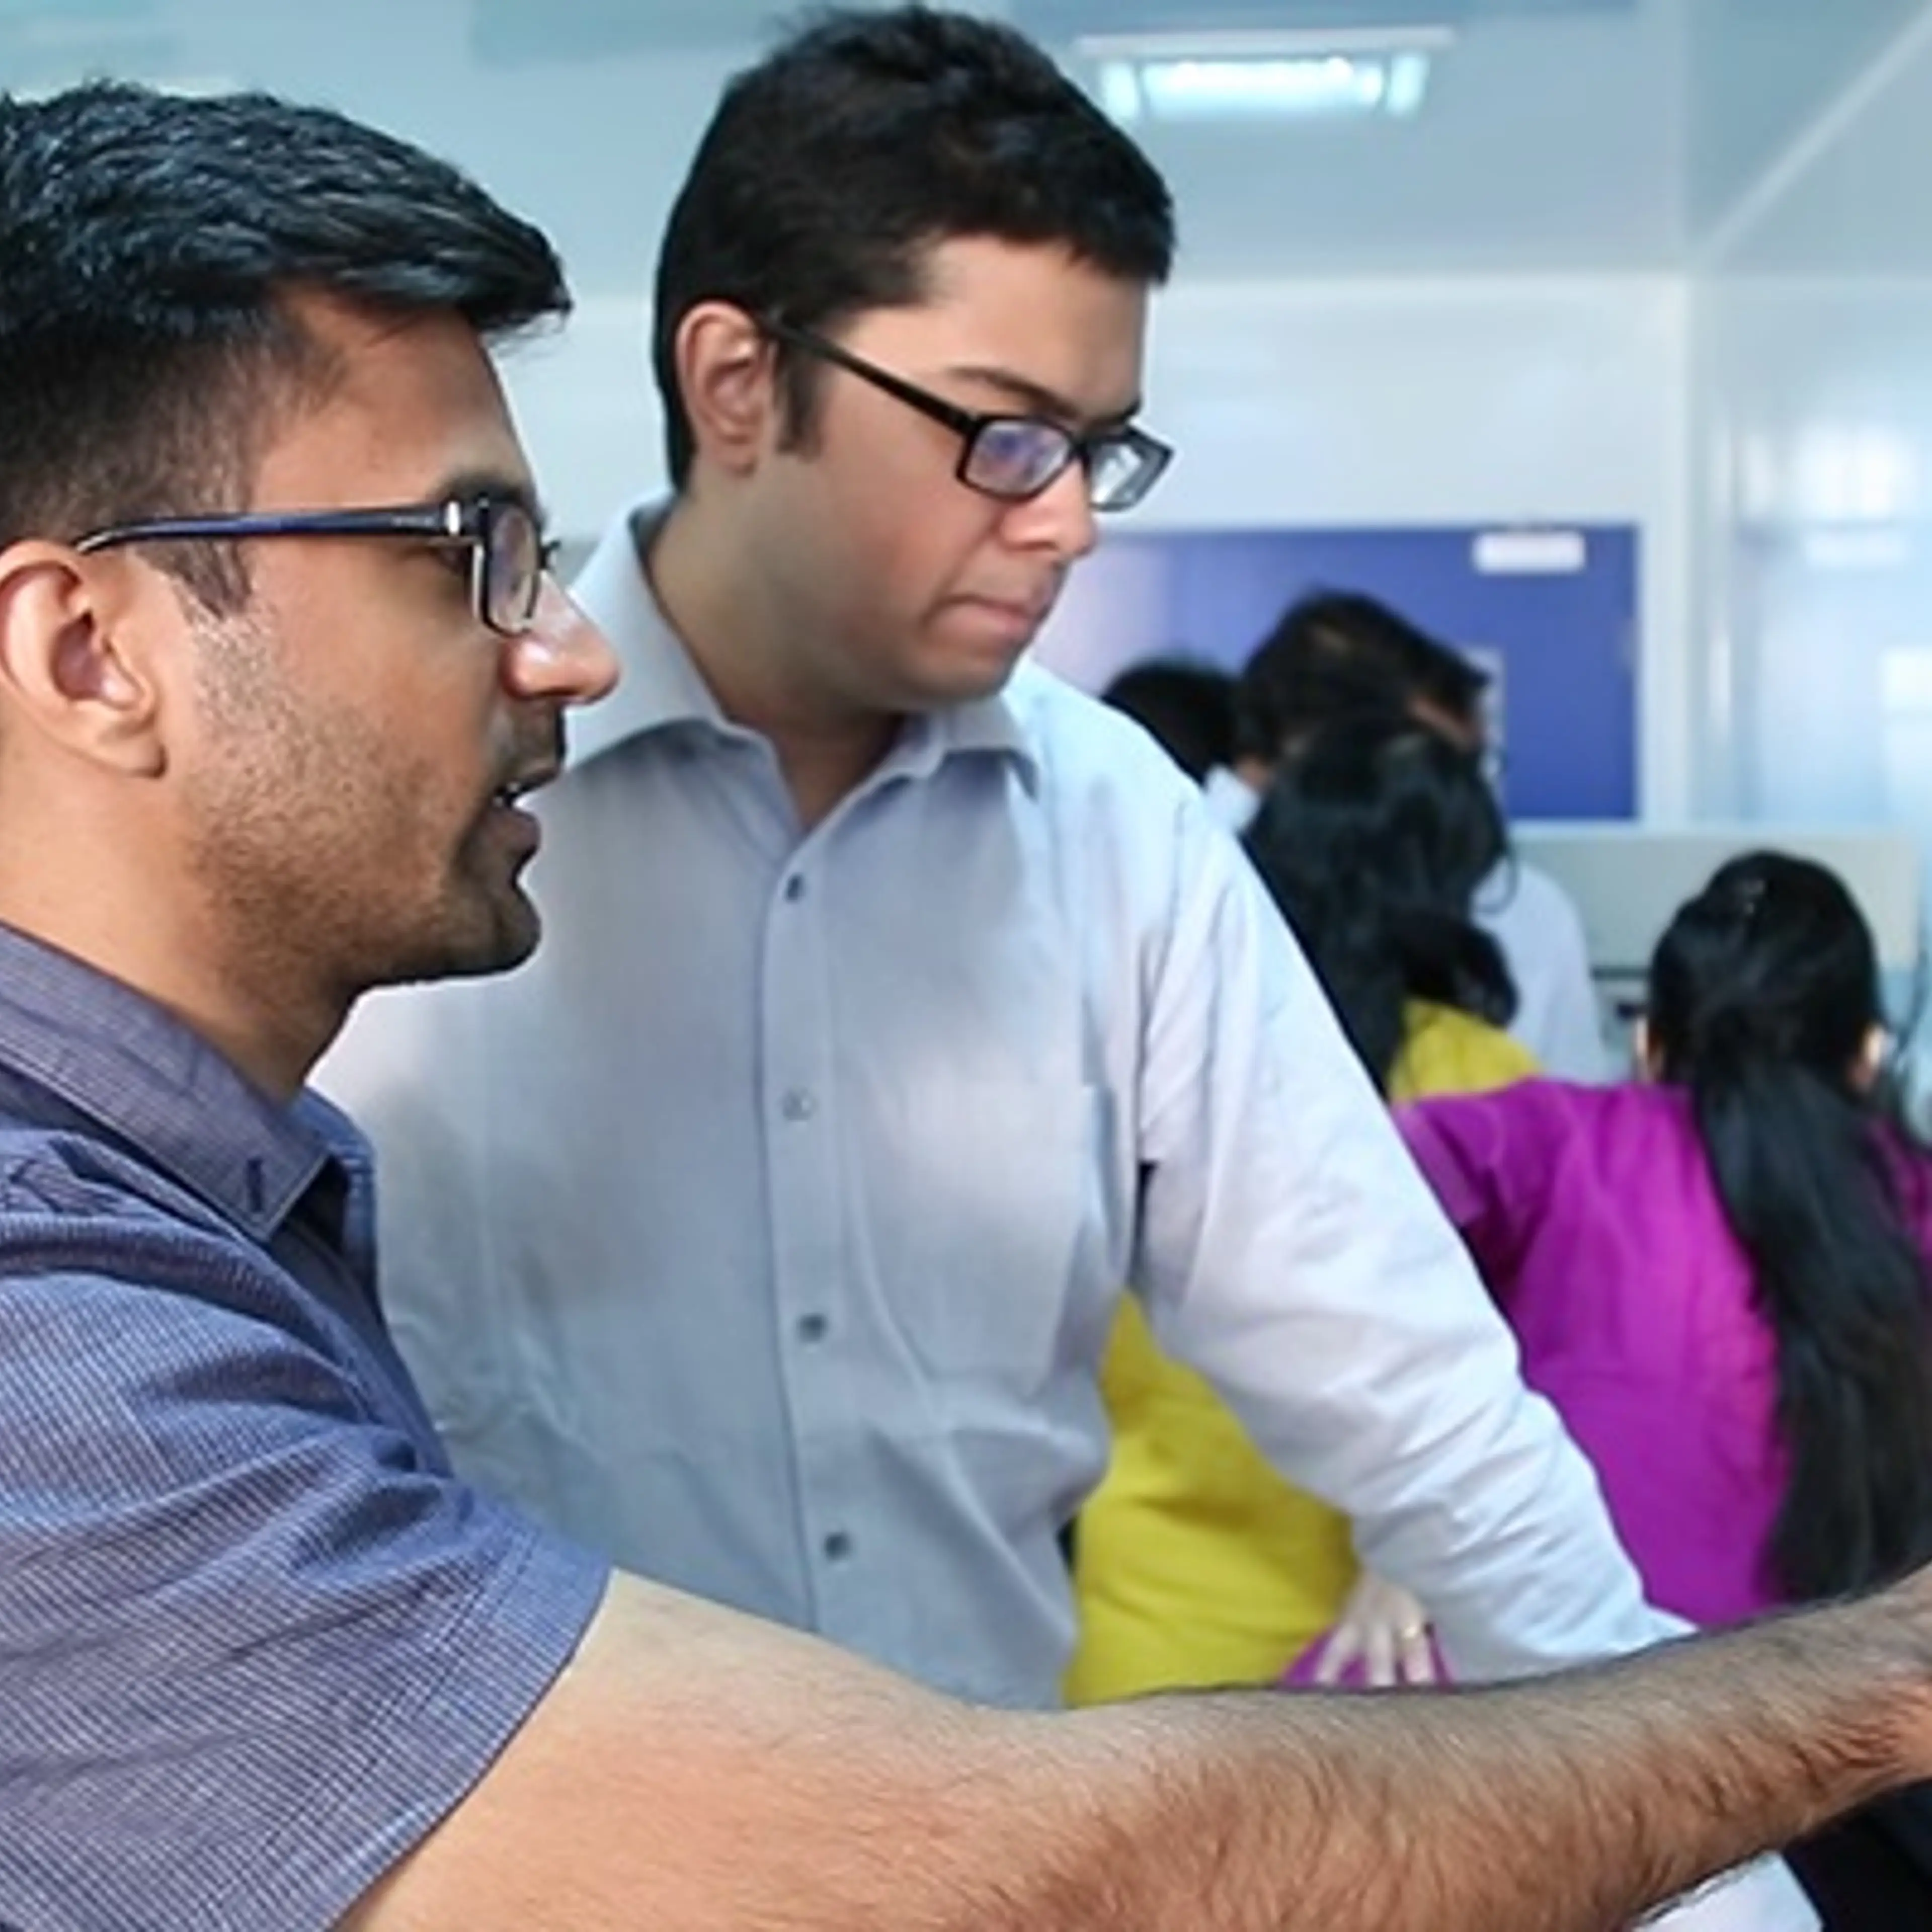 This startup founded by IIT alumni could be a cure for the pharma industry's compliance issues